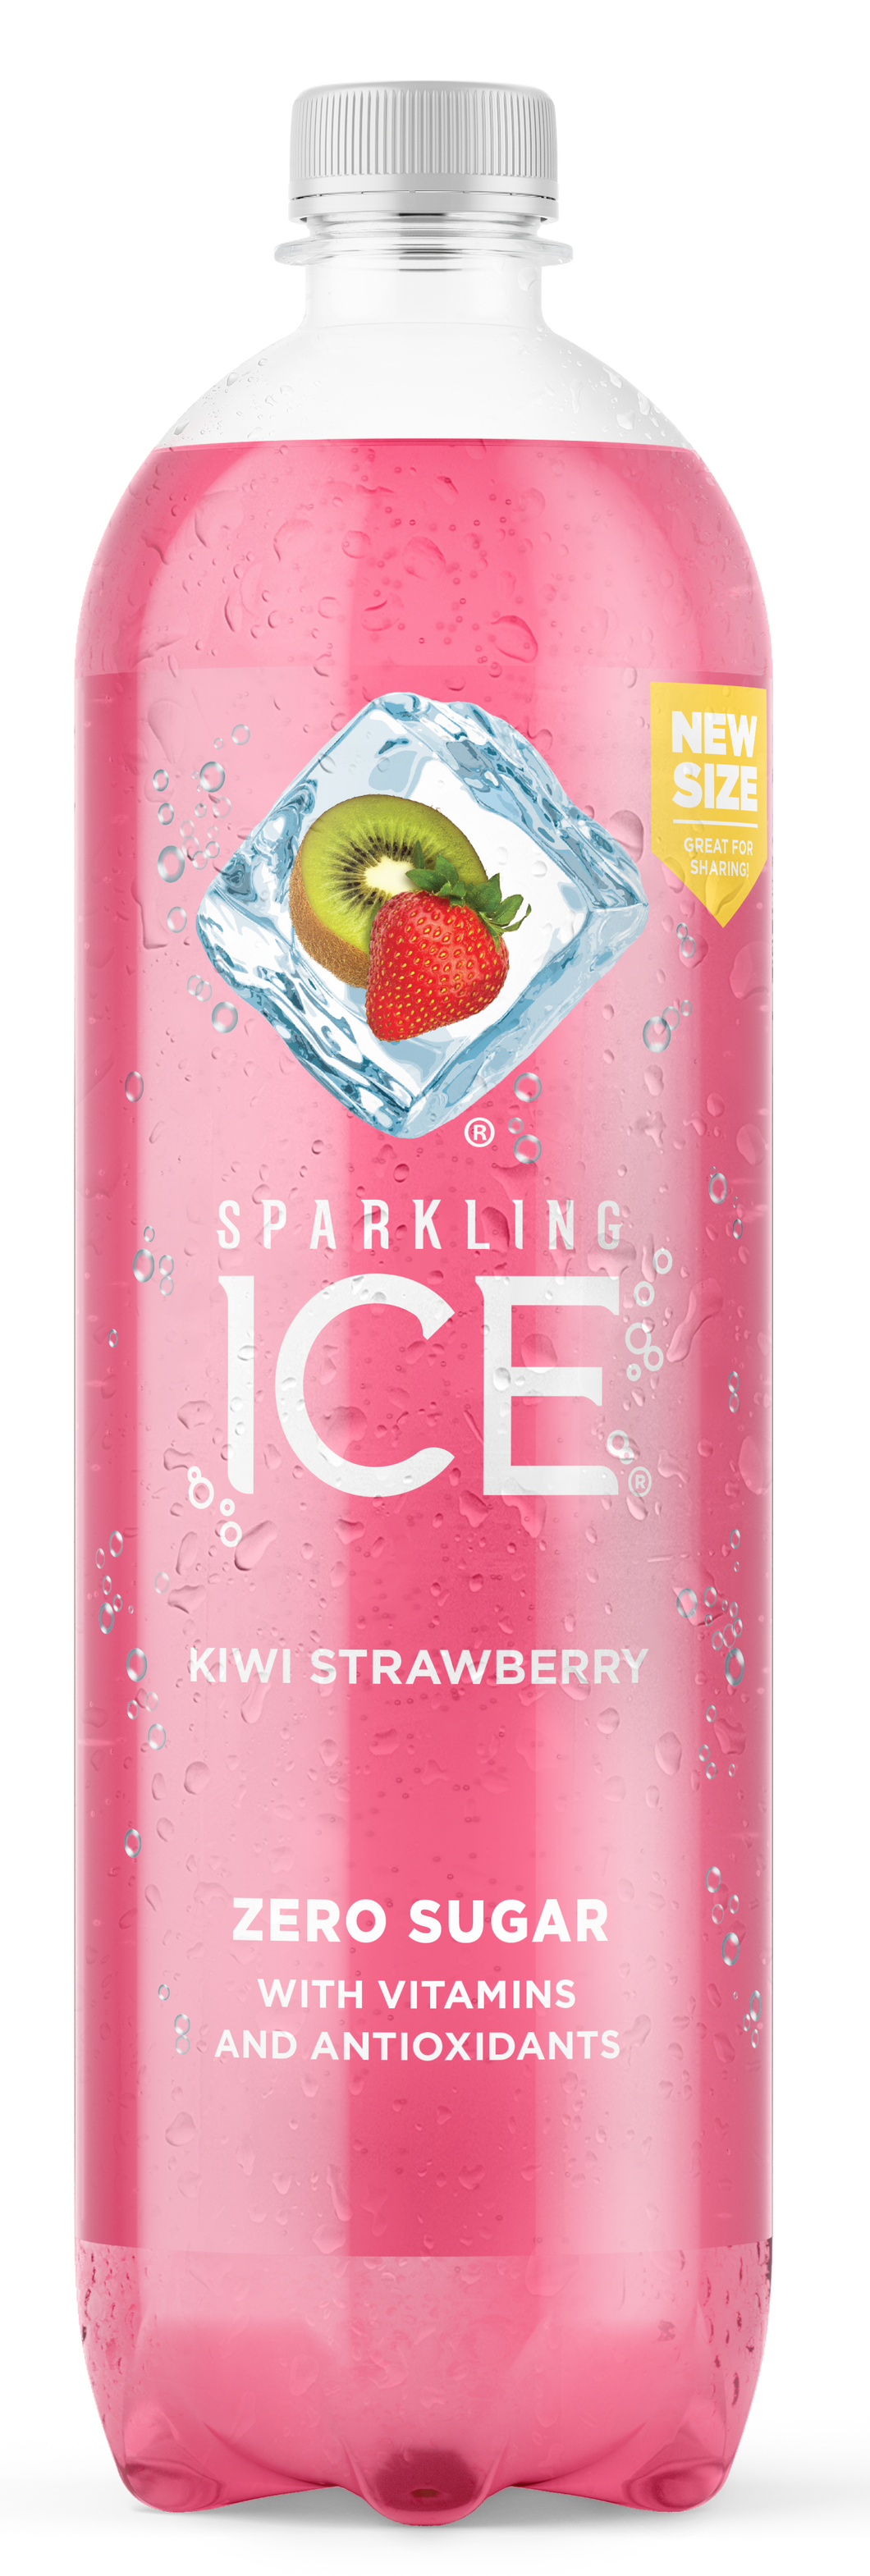 Sparkling Ice Flavored Sparkling Water, Kiwi Strawberry, 1 Liter - Multi Pack